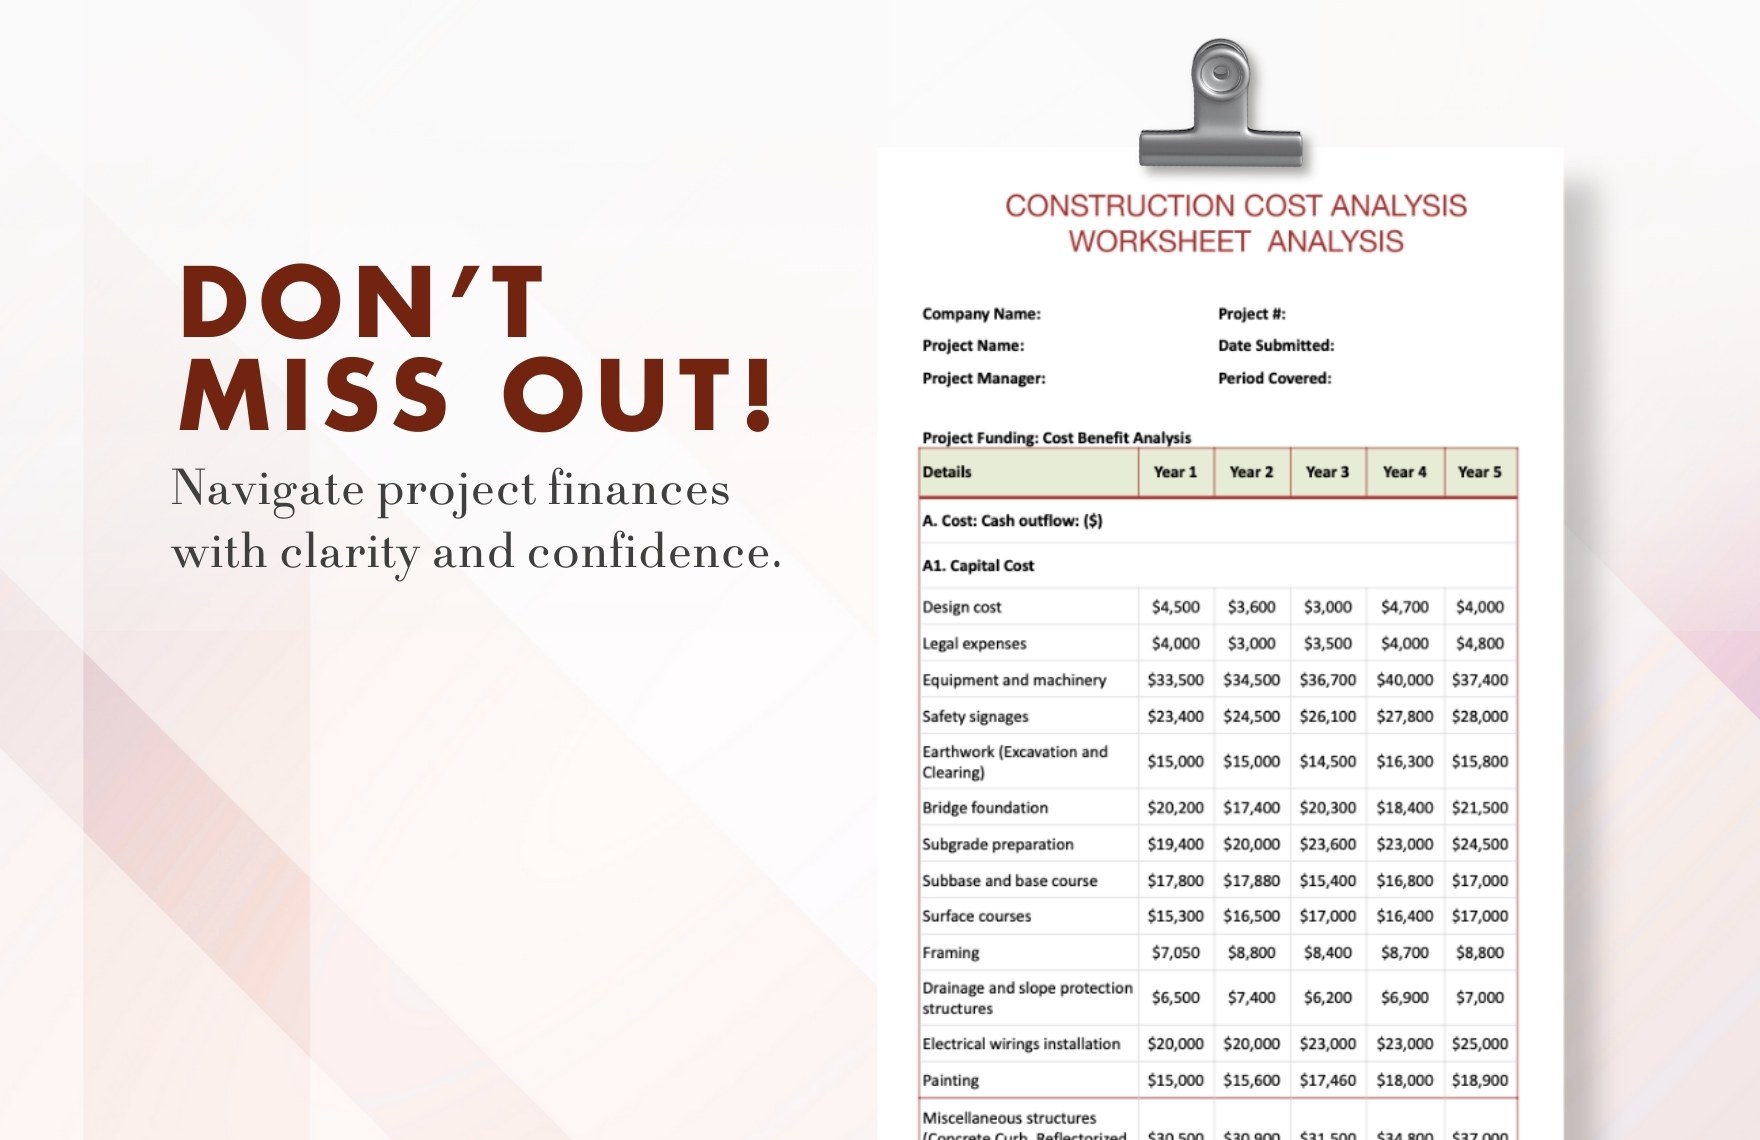 Construction Cost Analysis Worksheet Template